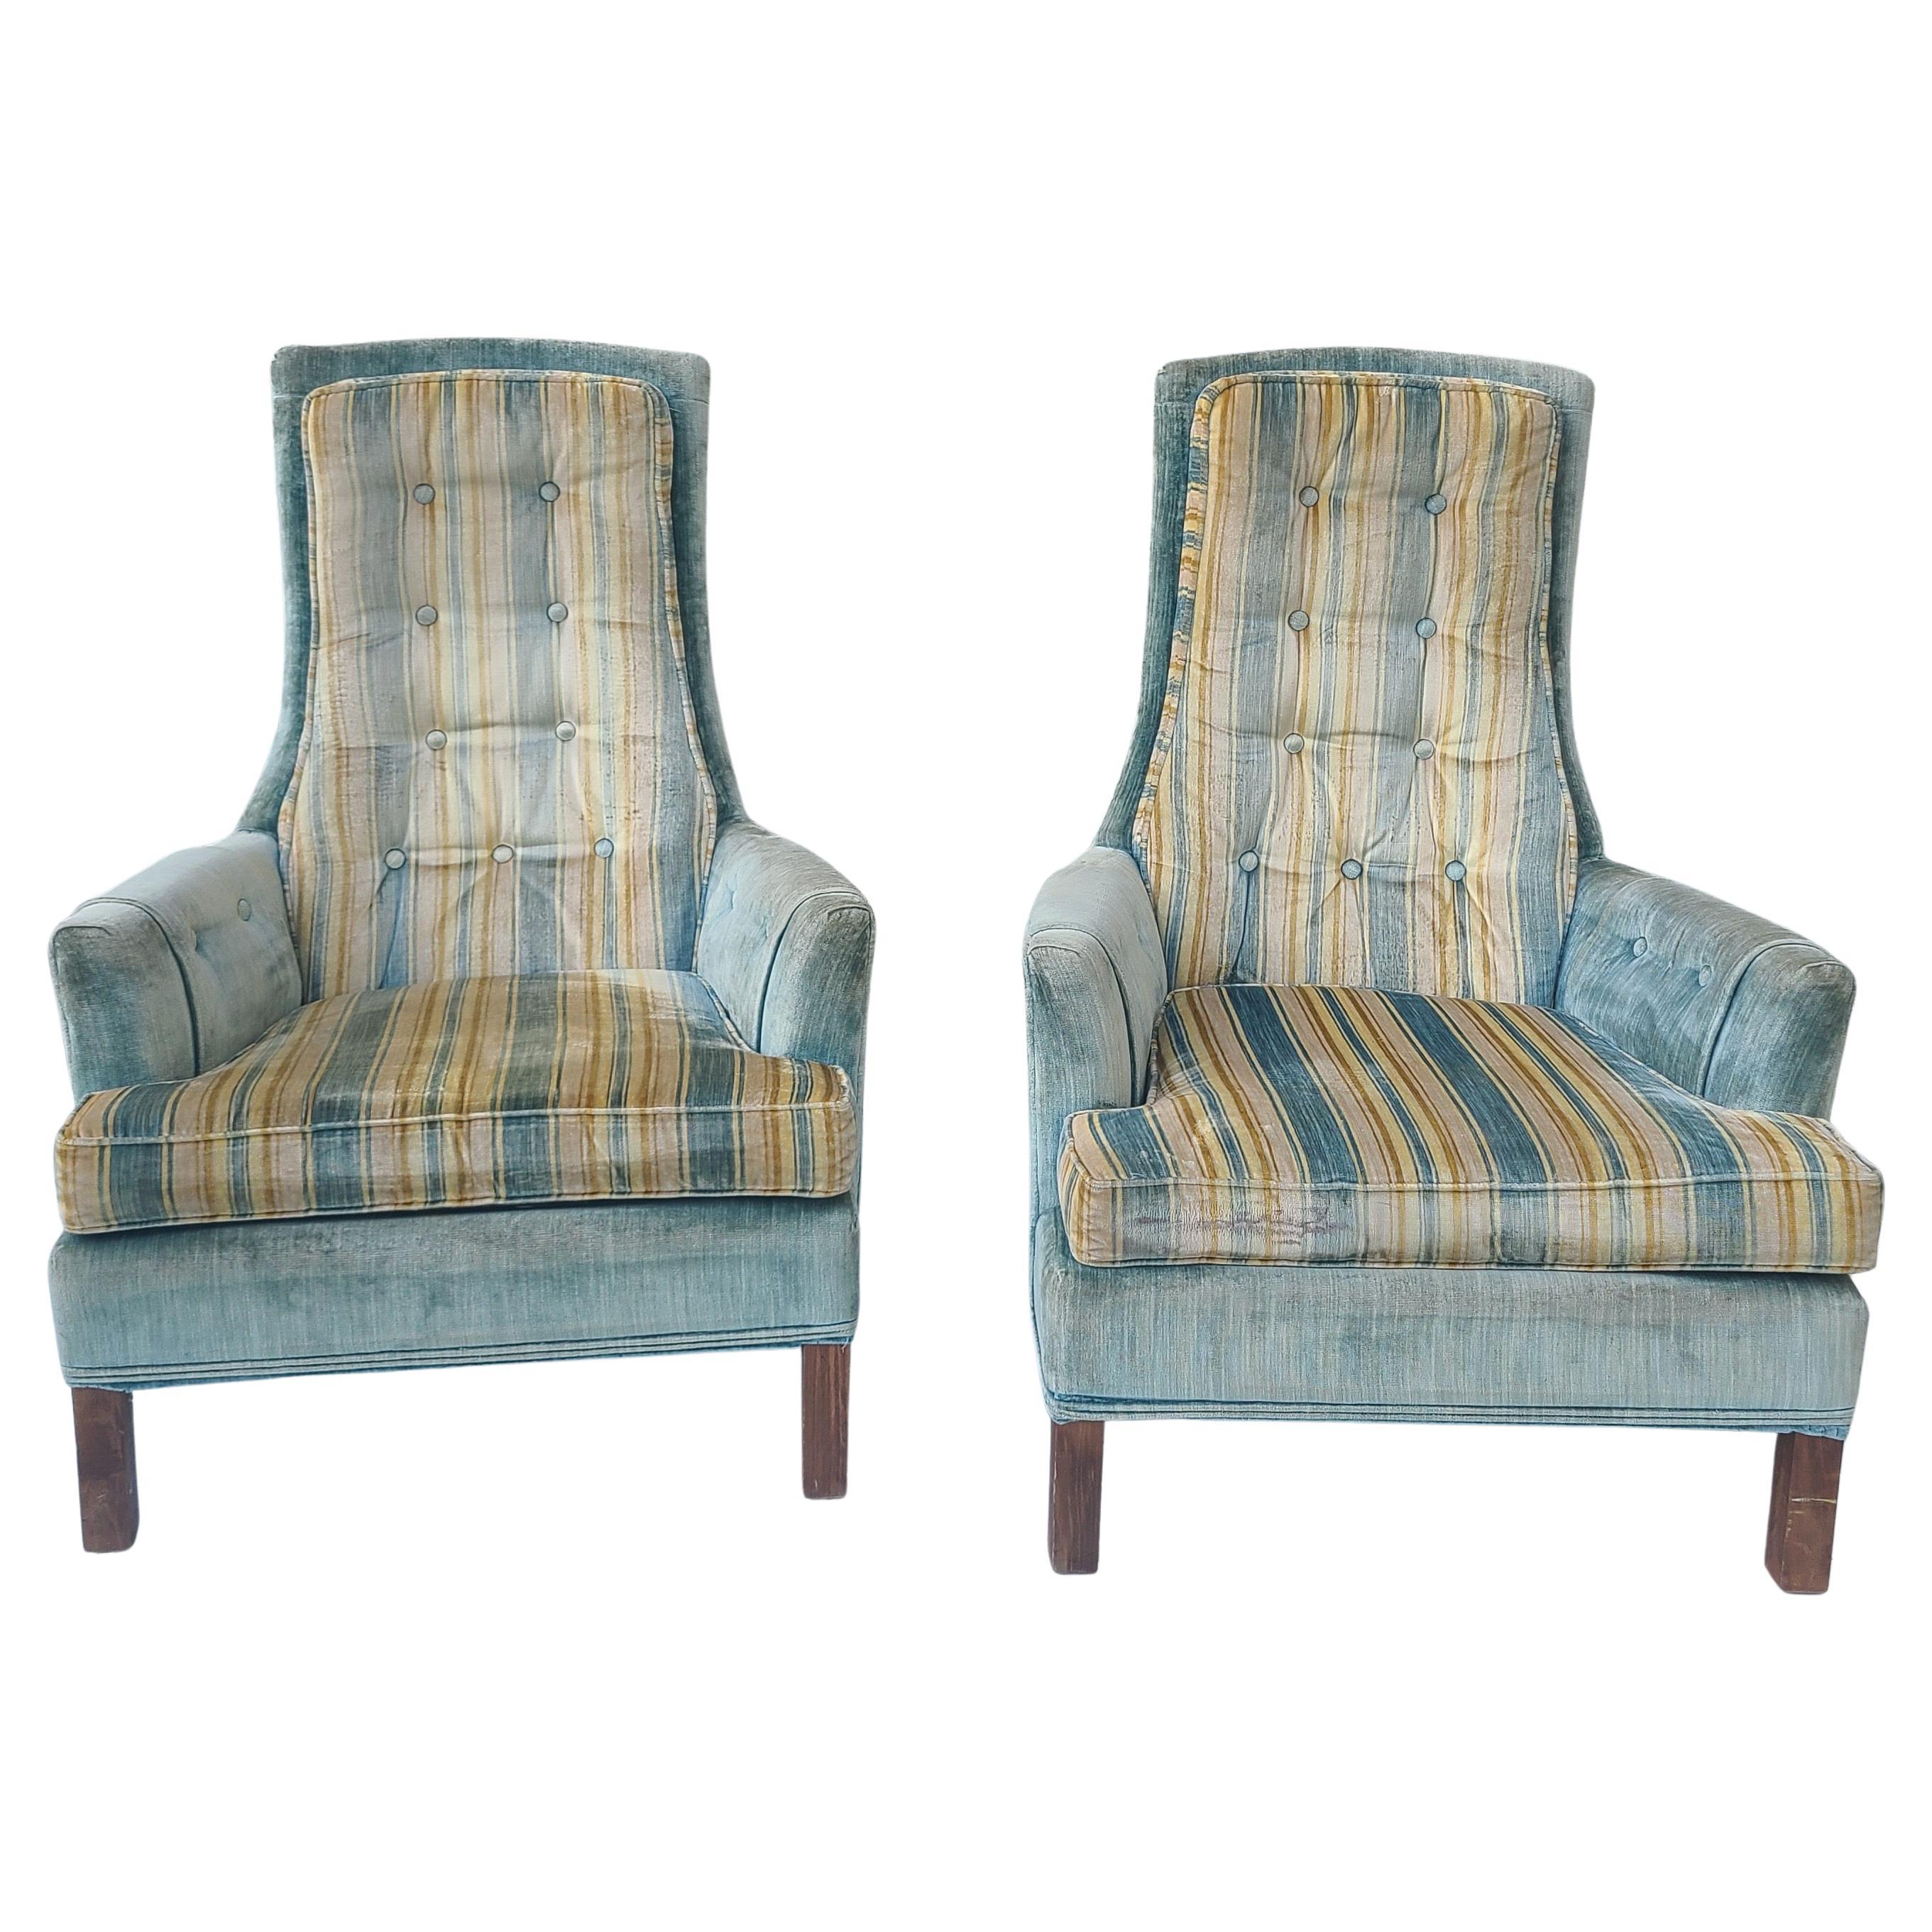 Pair high back lounge chairs by Broyhill.
Unrestored original upholstery.

 